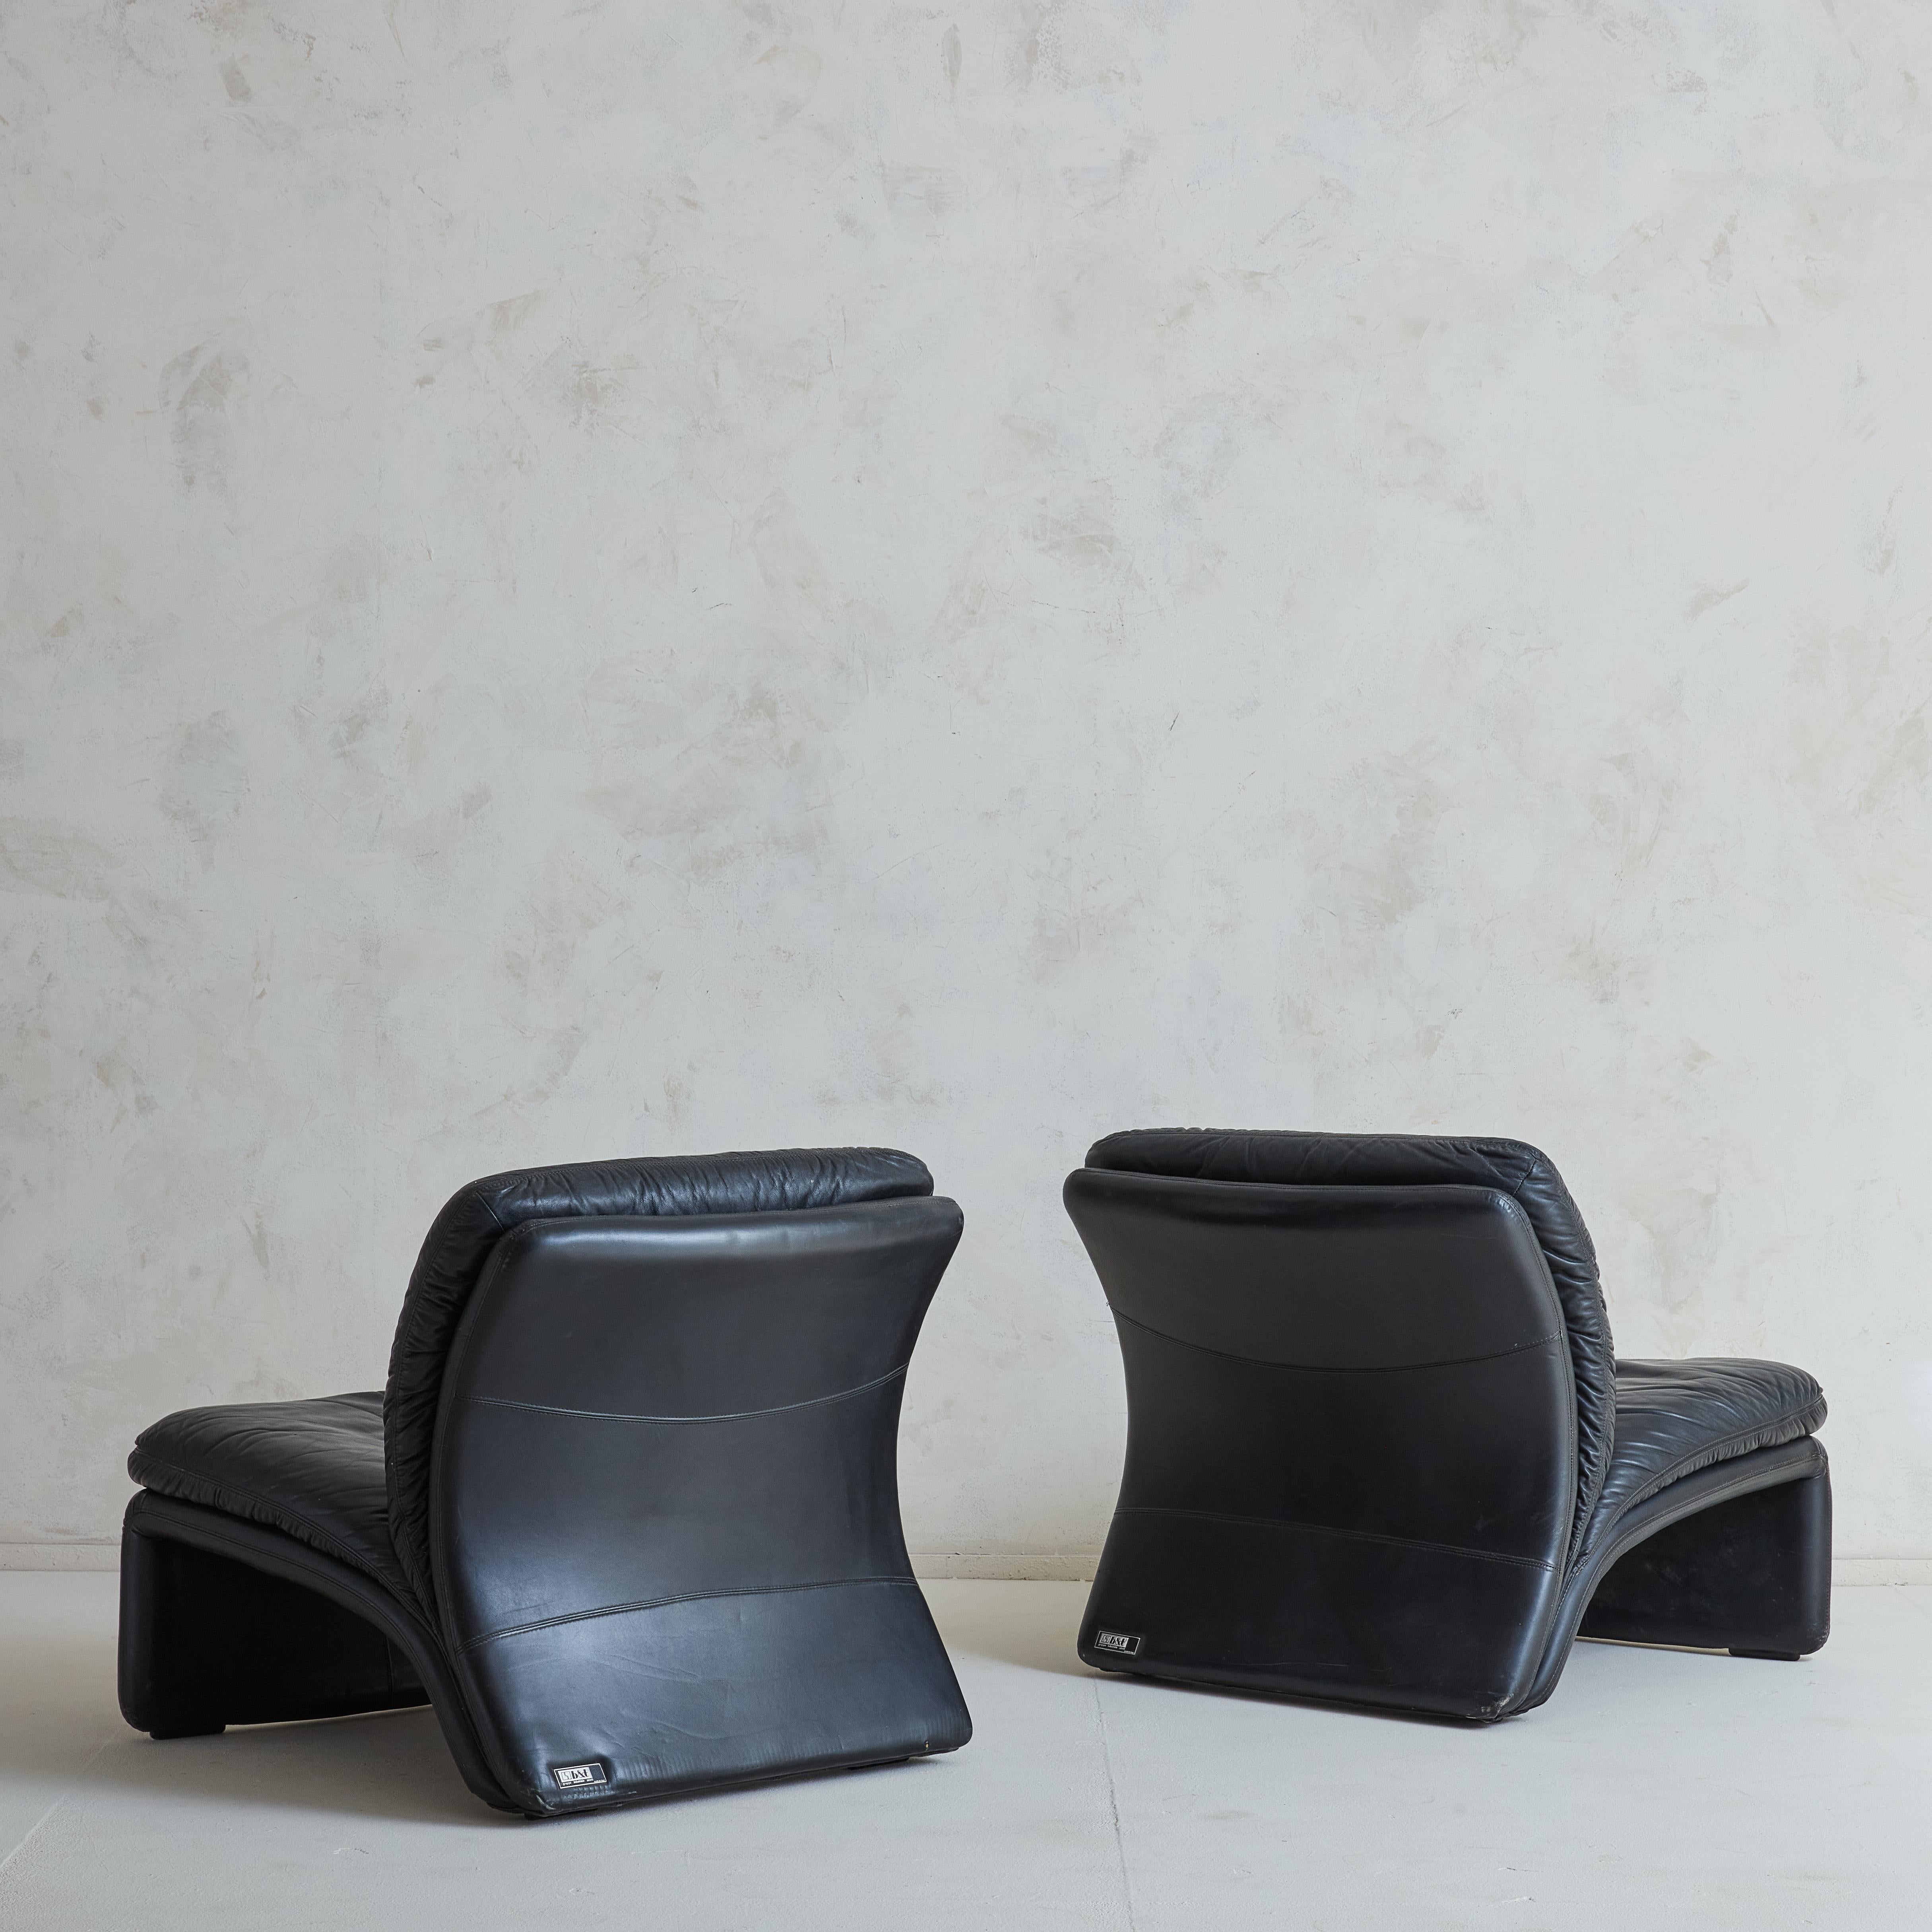 Post-Modern Curved Lounge Chair in Original Black Leather by B&T Salotti, Italy 1990s